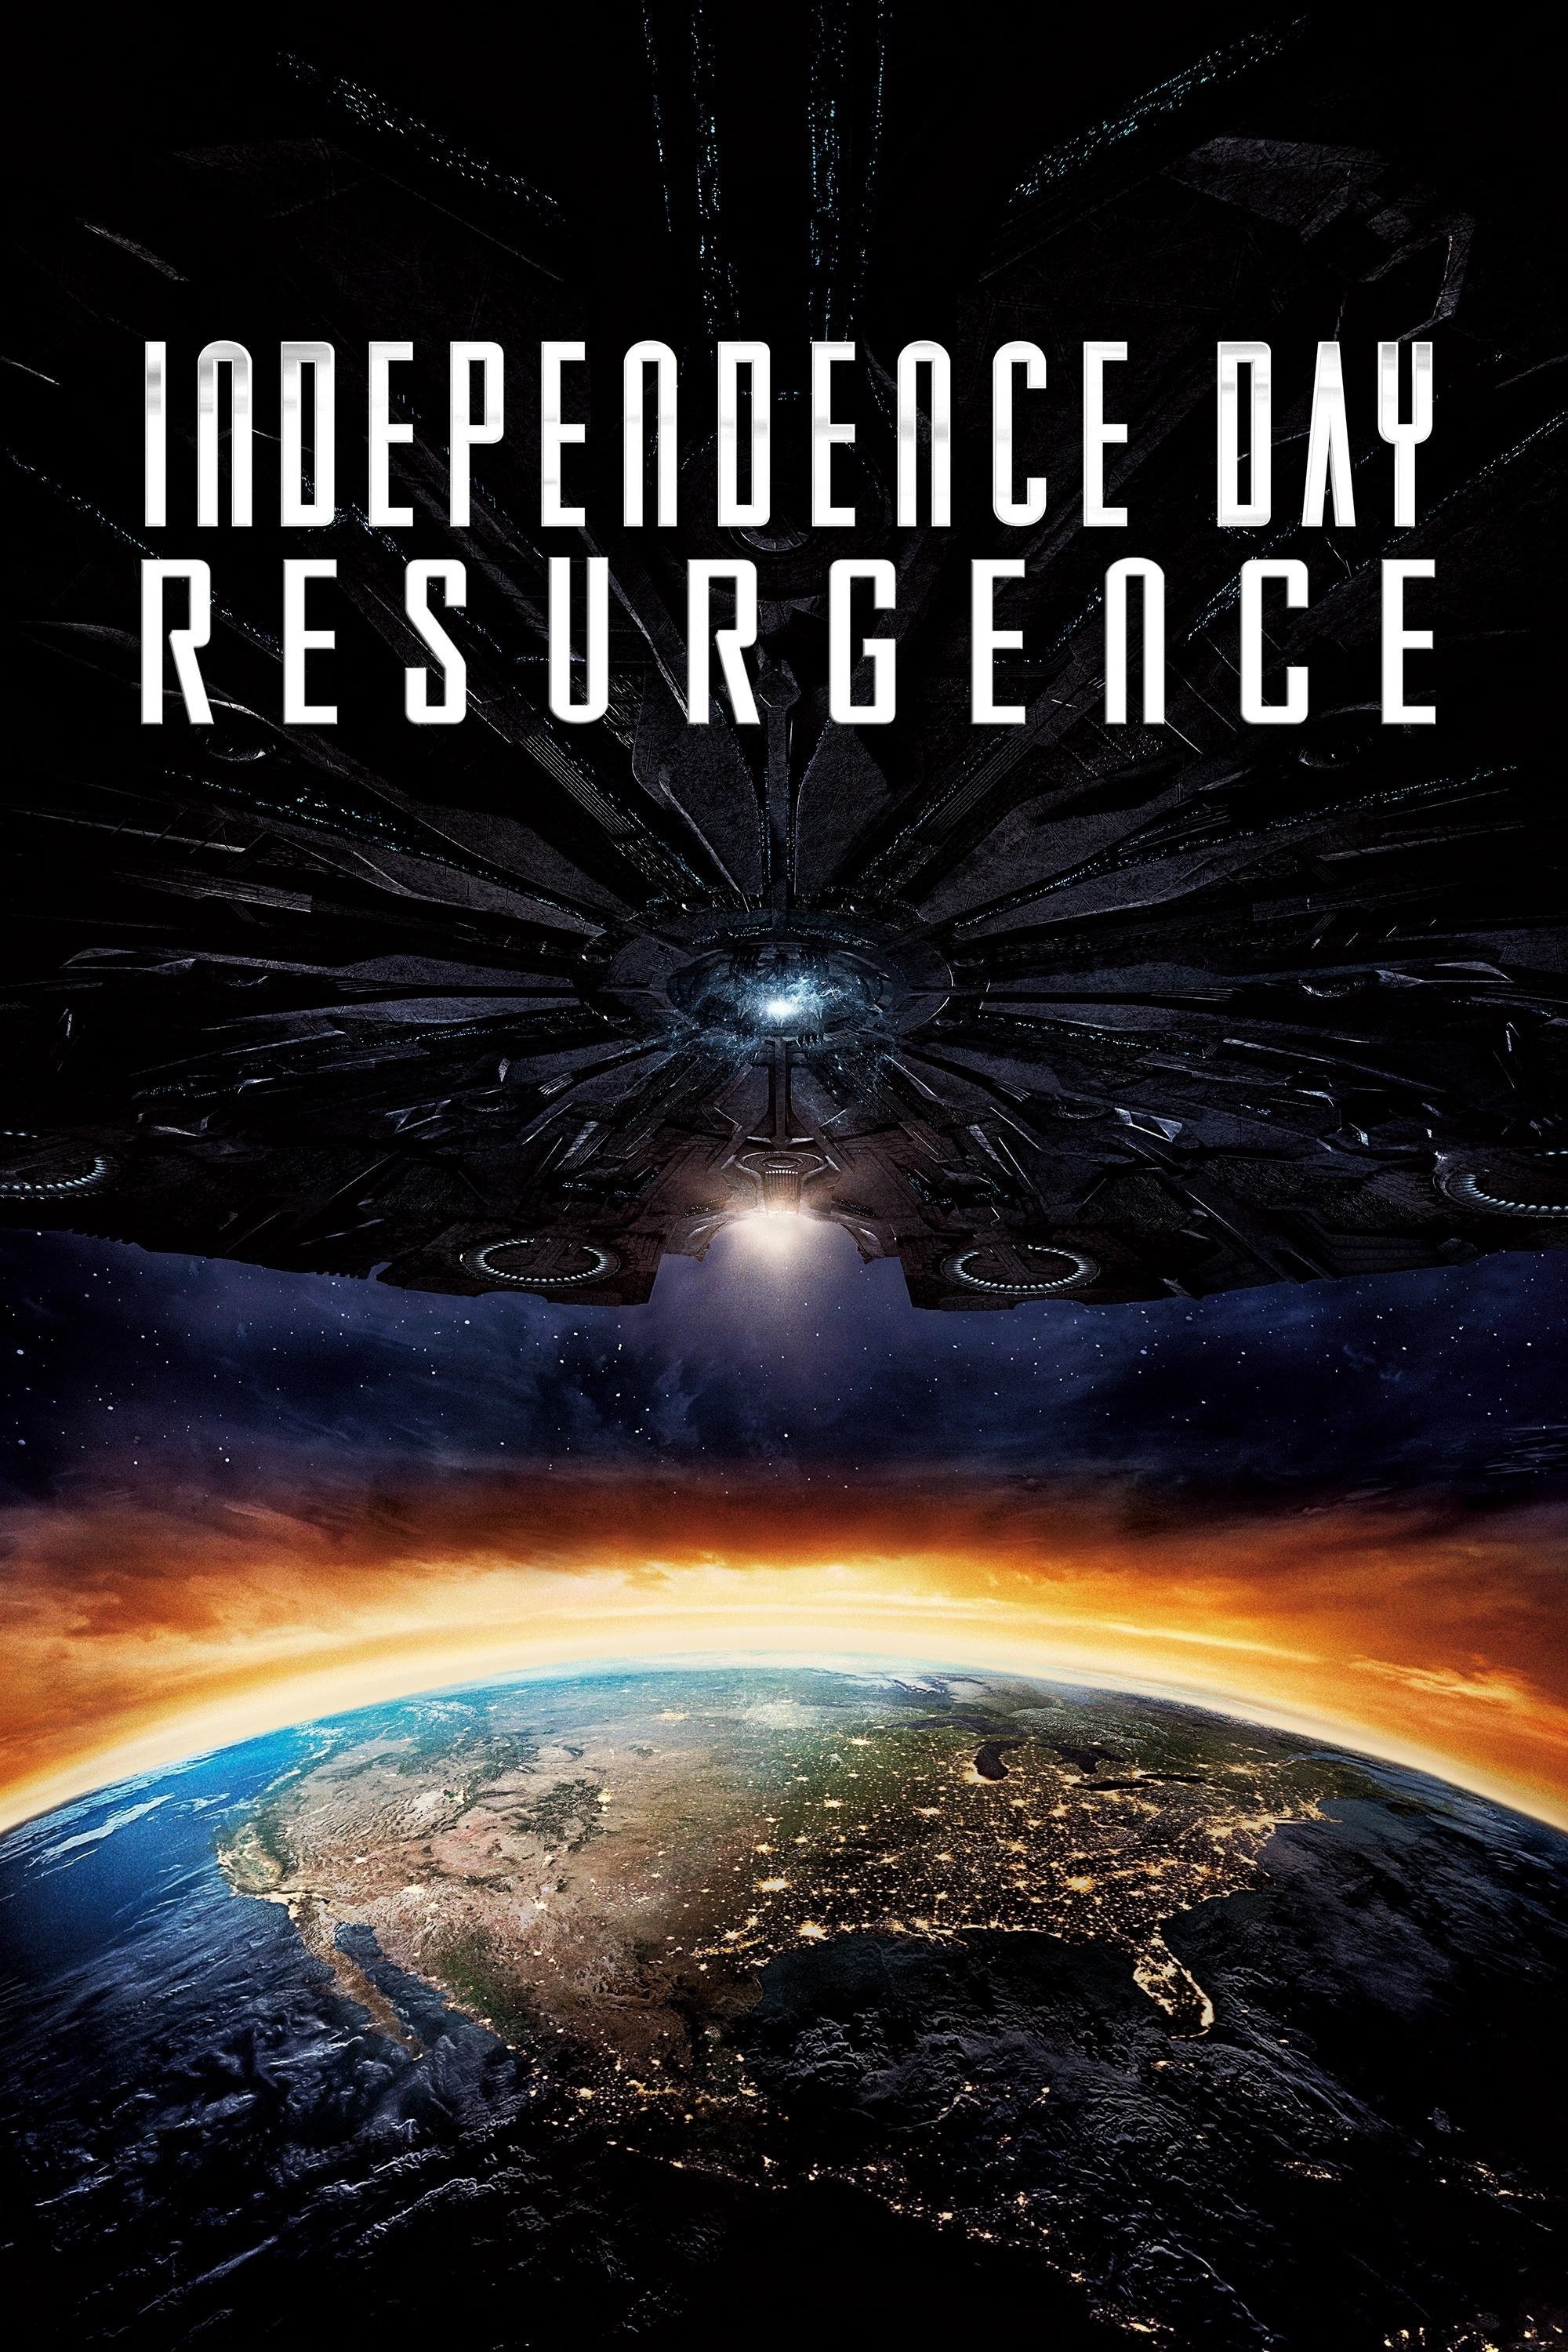 Independence Day movie watch online Hindi